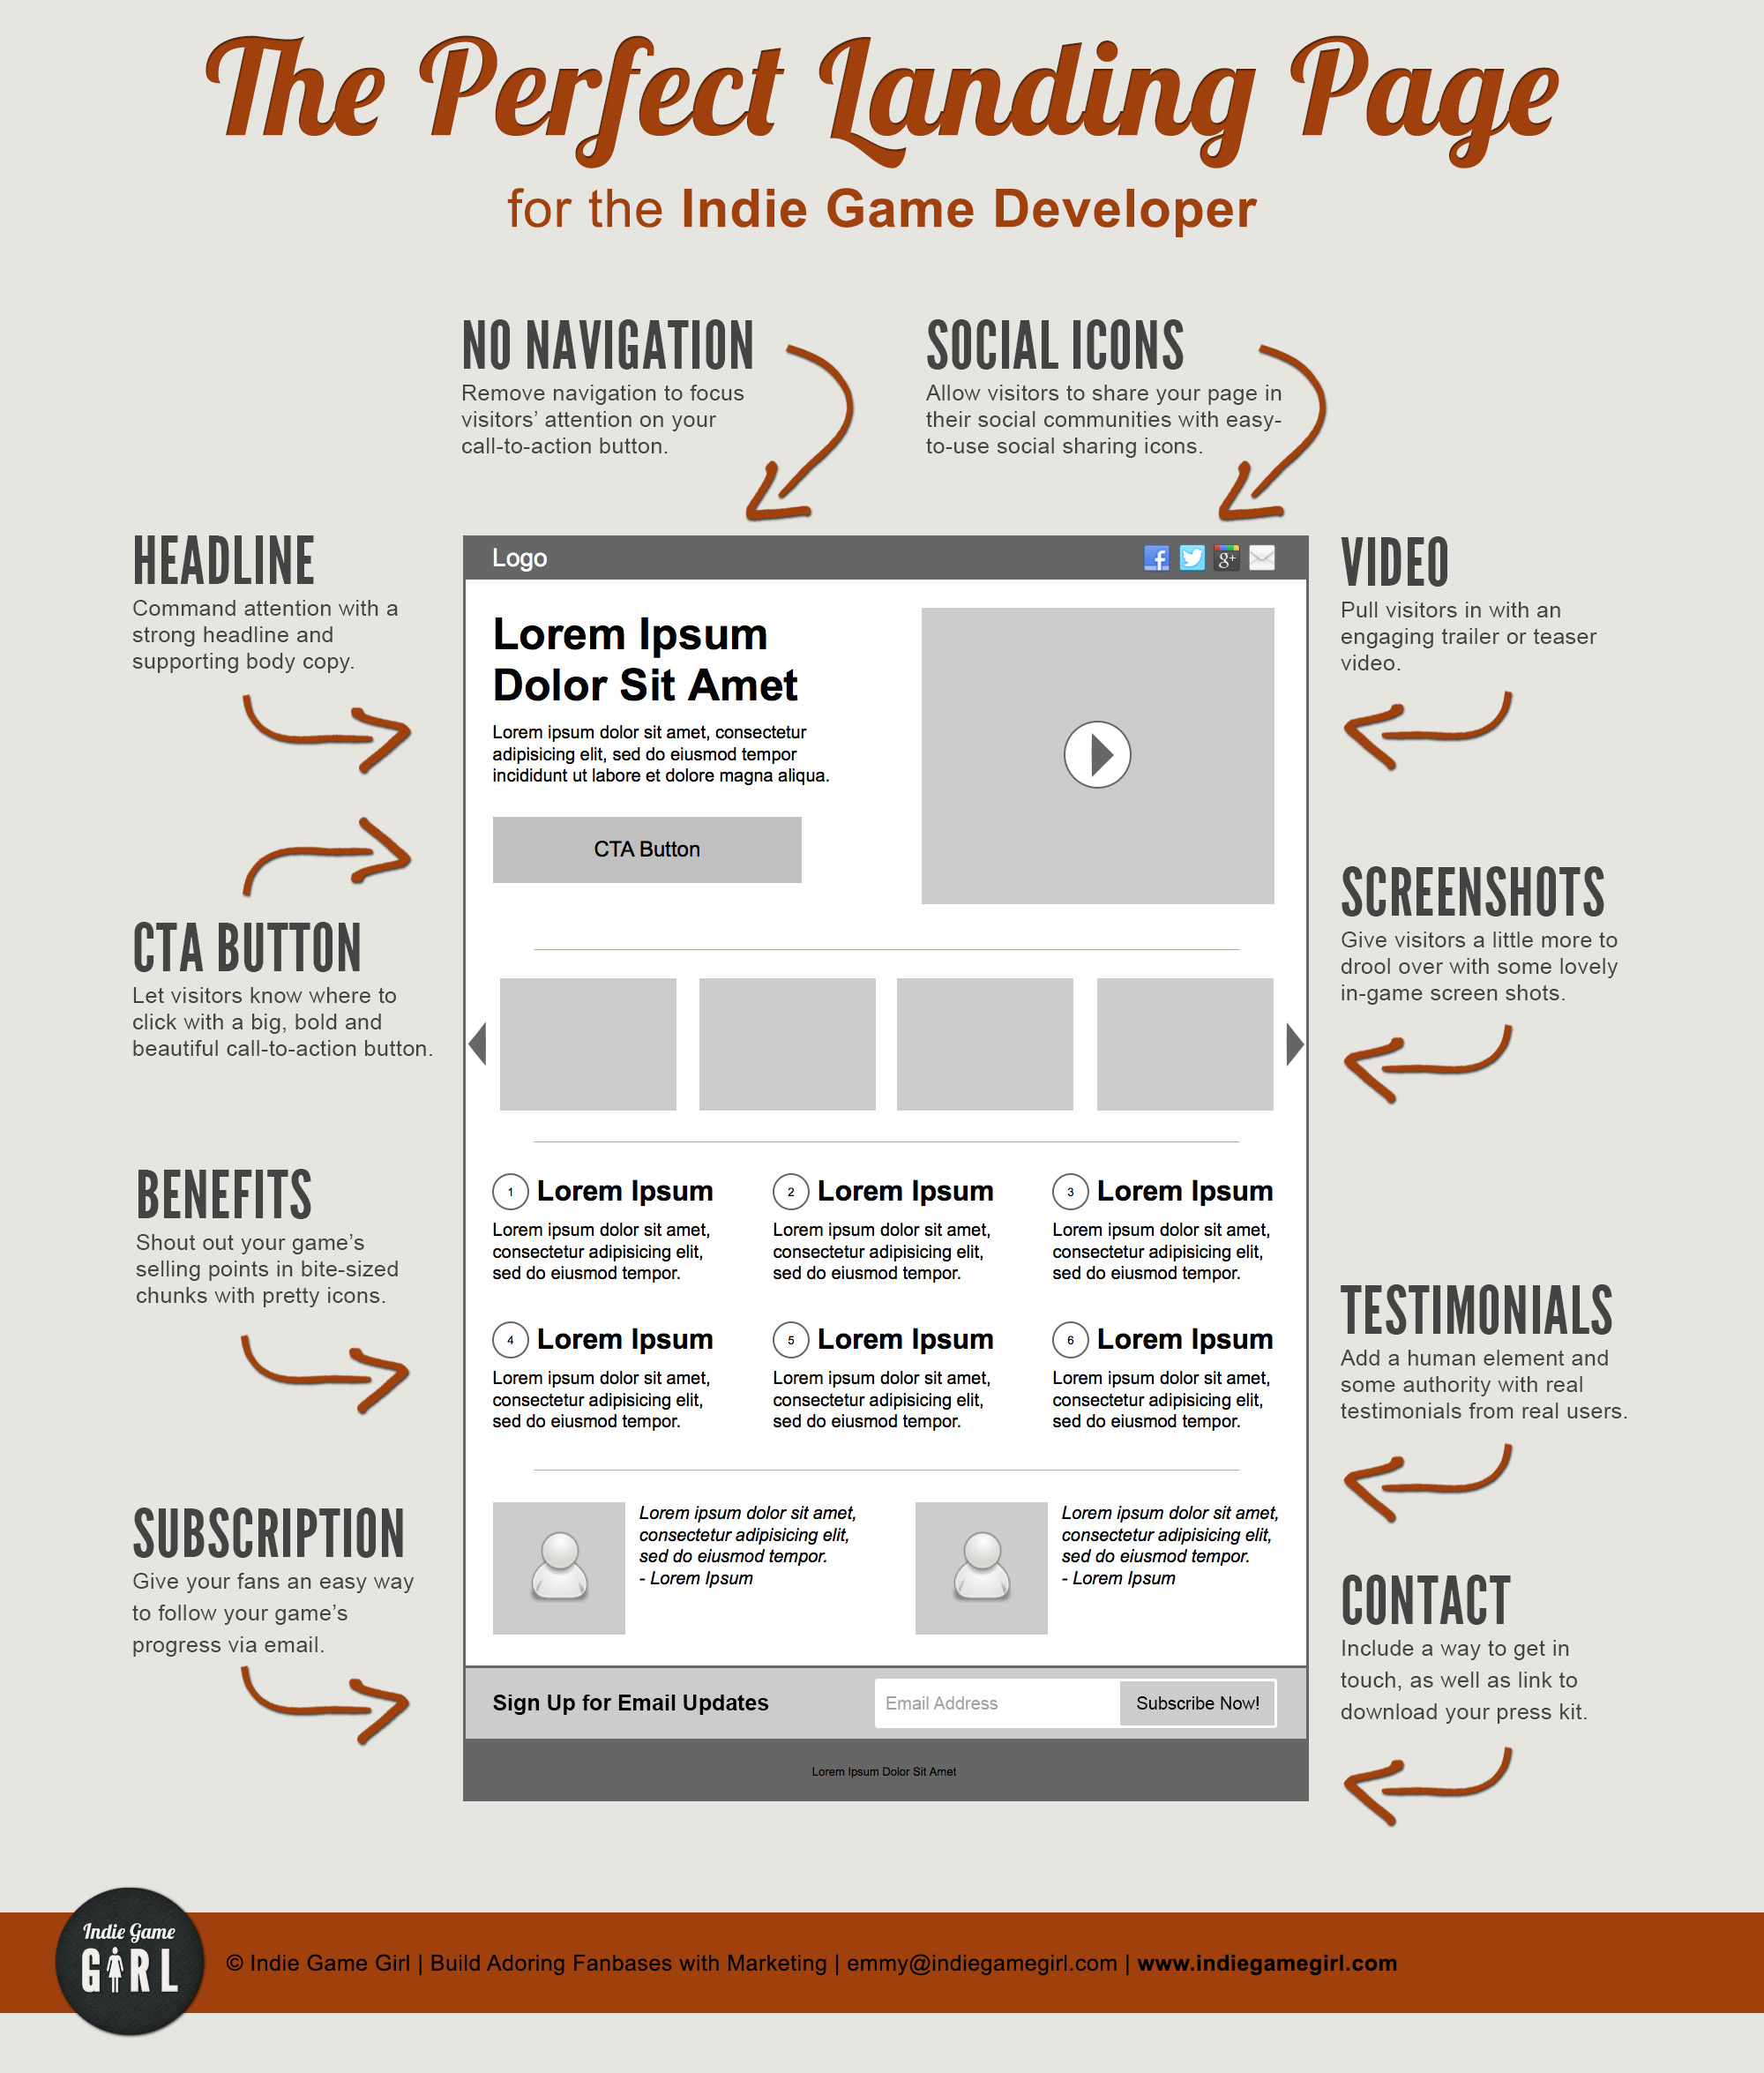 The perfect landing page design for an indie game developer's game.